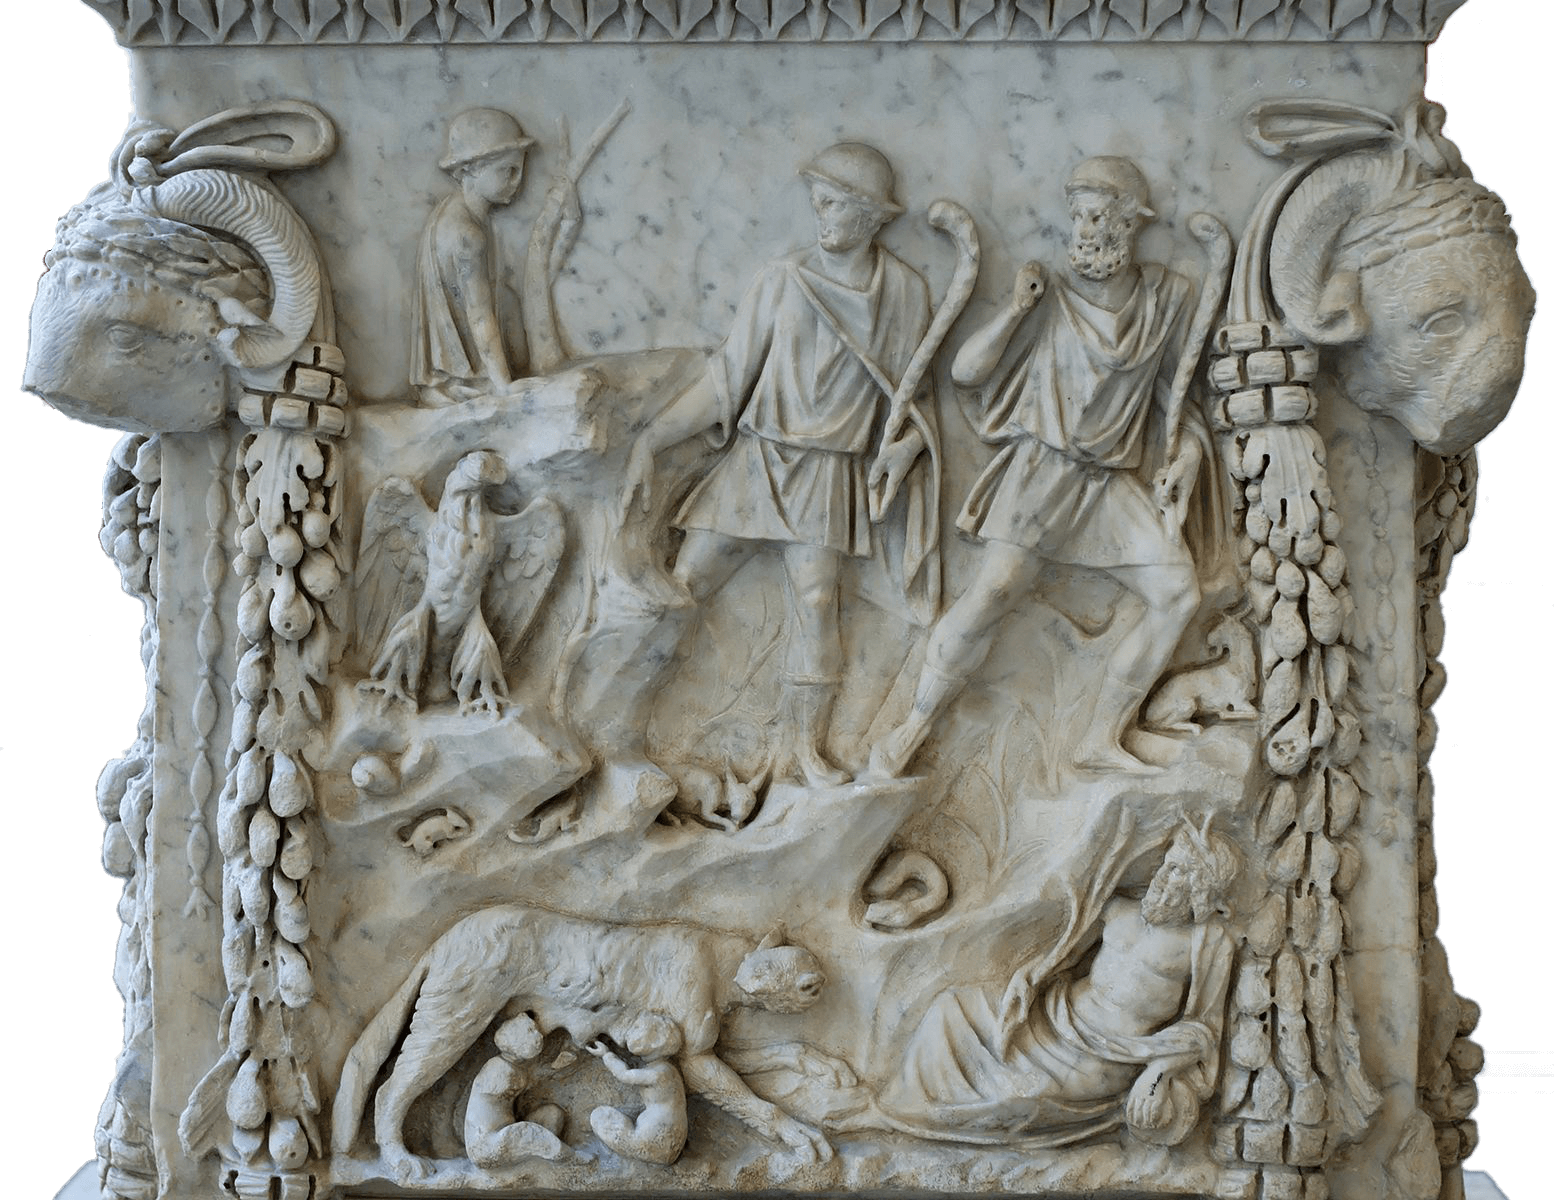 One side of a stone altar. It is intricately carved. At the bottom left a wolf suckles two young children in a cave. On the bottom right an old man with a beard reclines. Above, an eagle sits on the left and two young men wearing caps stand. On the top left a shepherd boy sits with a staff. On either side of the image are two ram heads and garlands of vines.